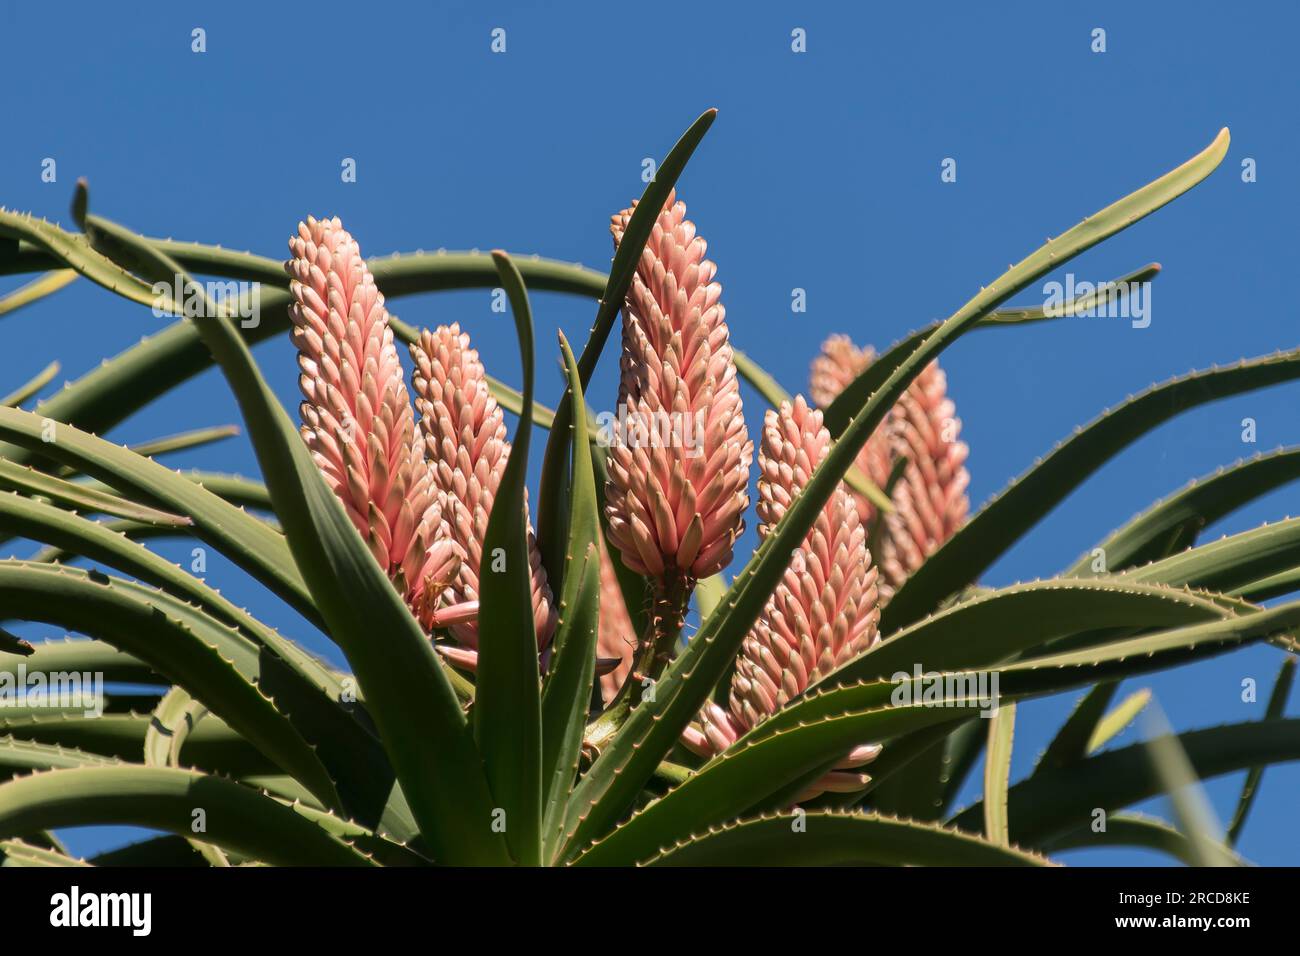 Large salmon pink tubular flowers of Aloe Barberae, tree aloe, native to South Africa, growing in sub-tropical Australian garden in Queensland. Winter Stock Photo